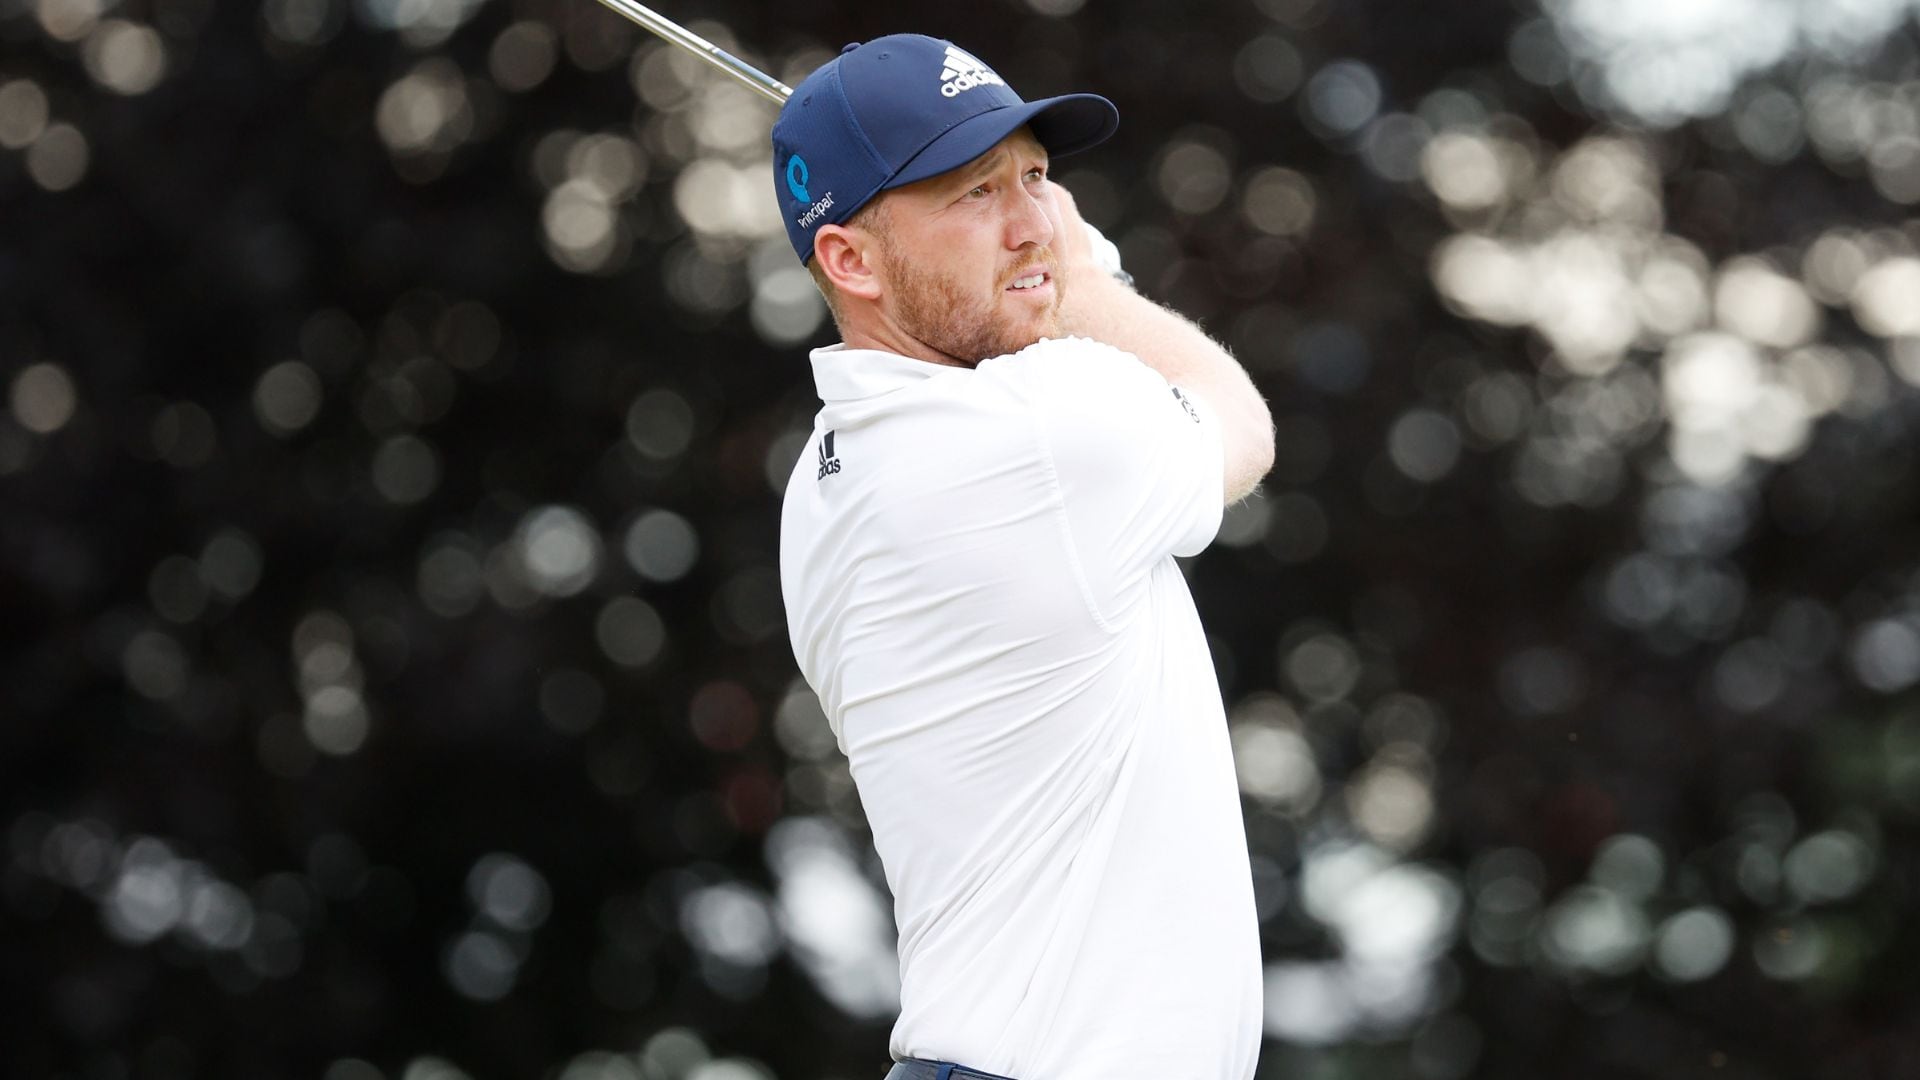 Daniel Berger set to play U.S. Open final qualifying after nearly a year off due to injury